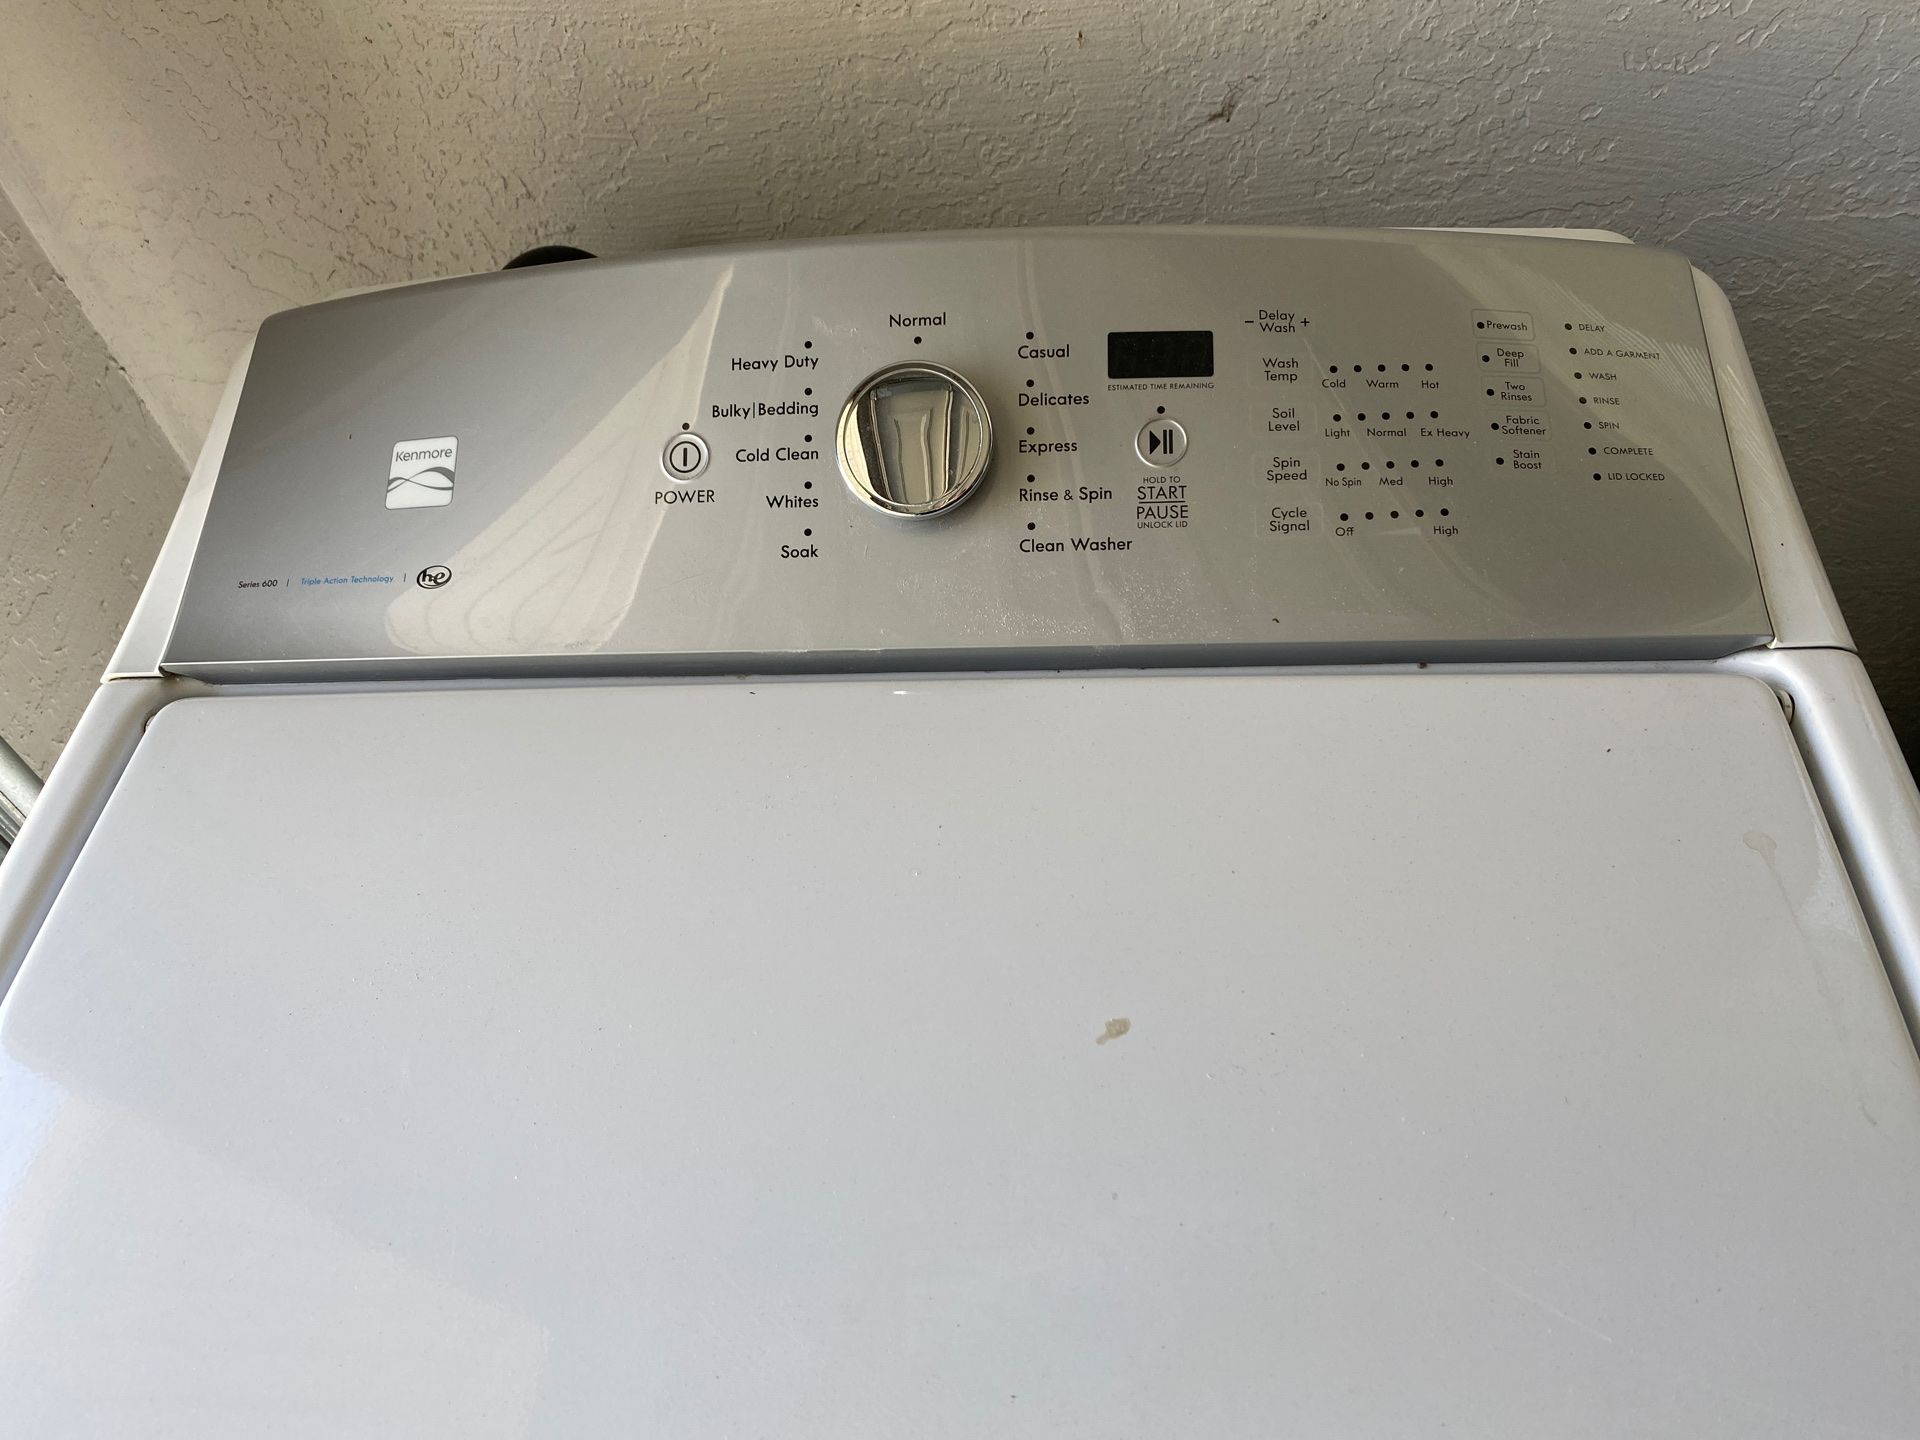 600 series Kenmore HE washer